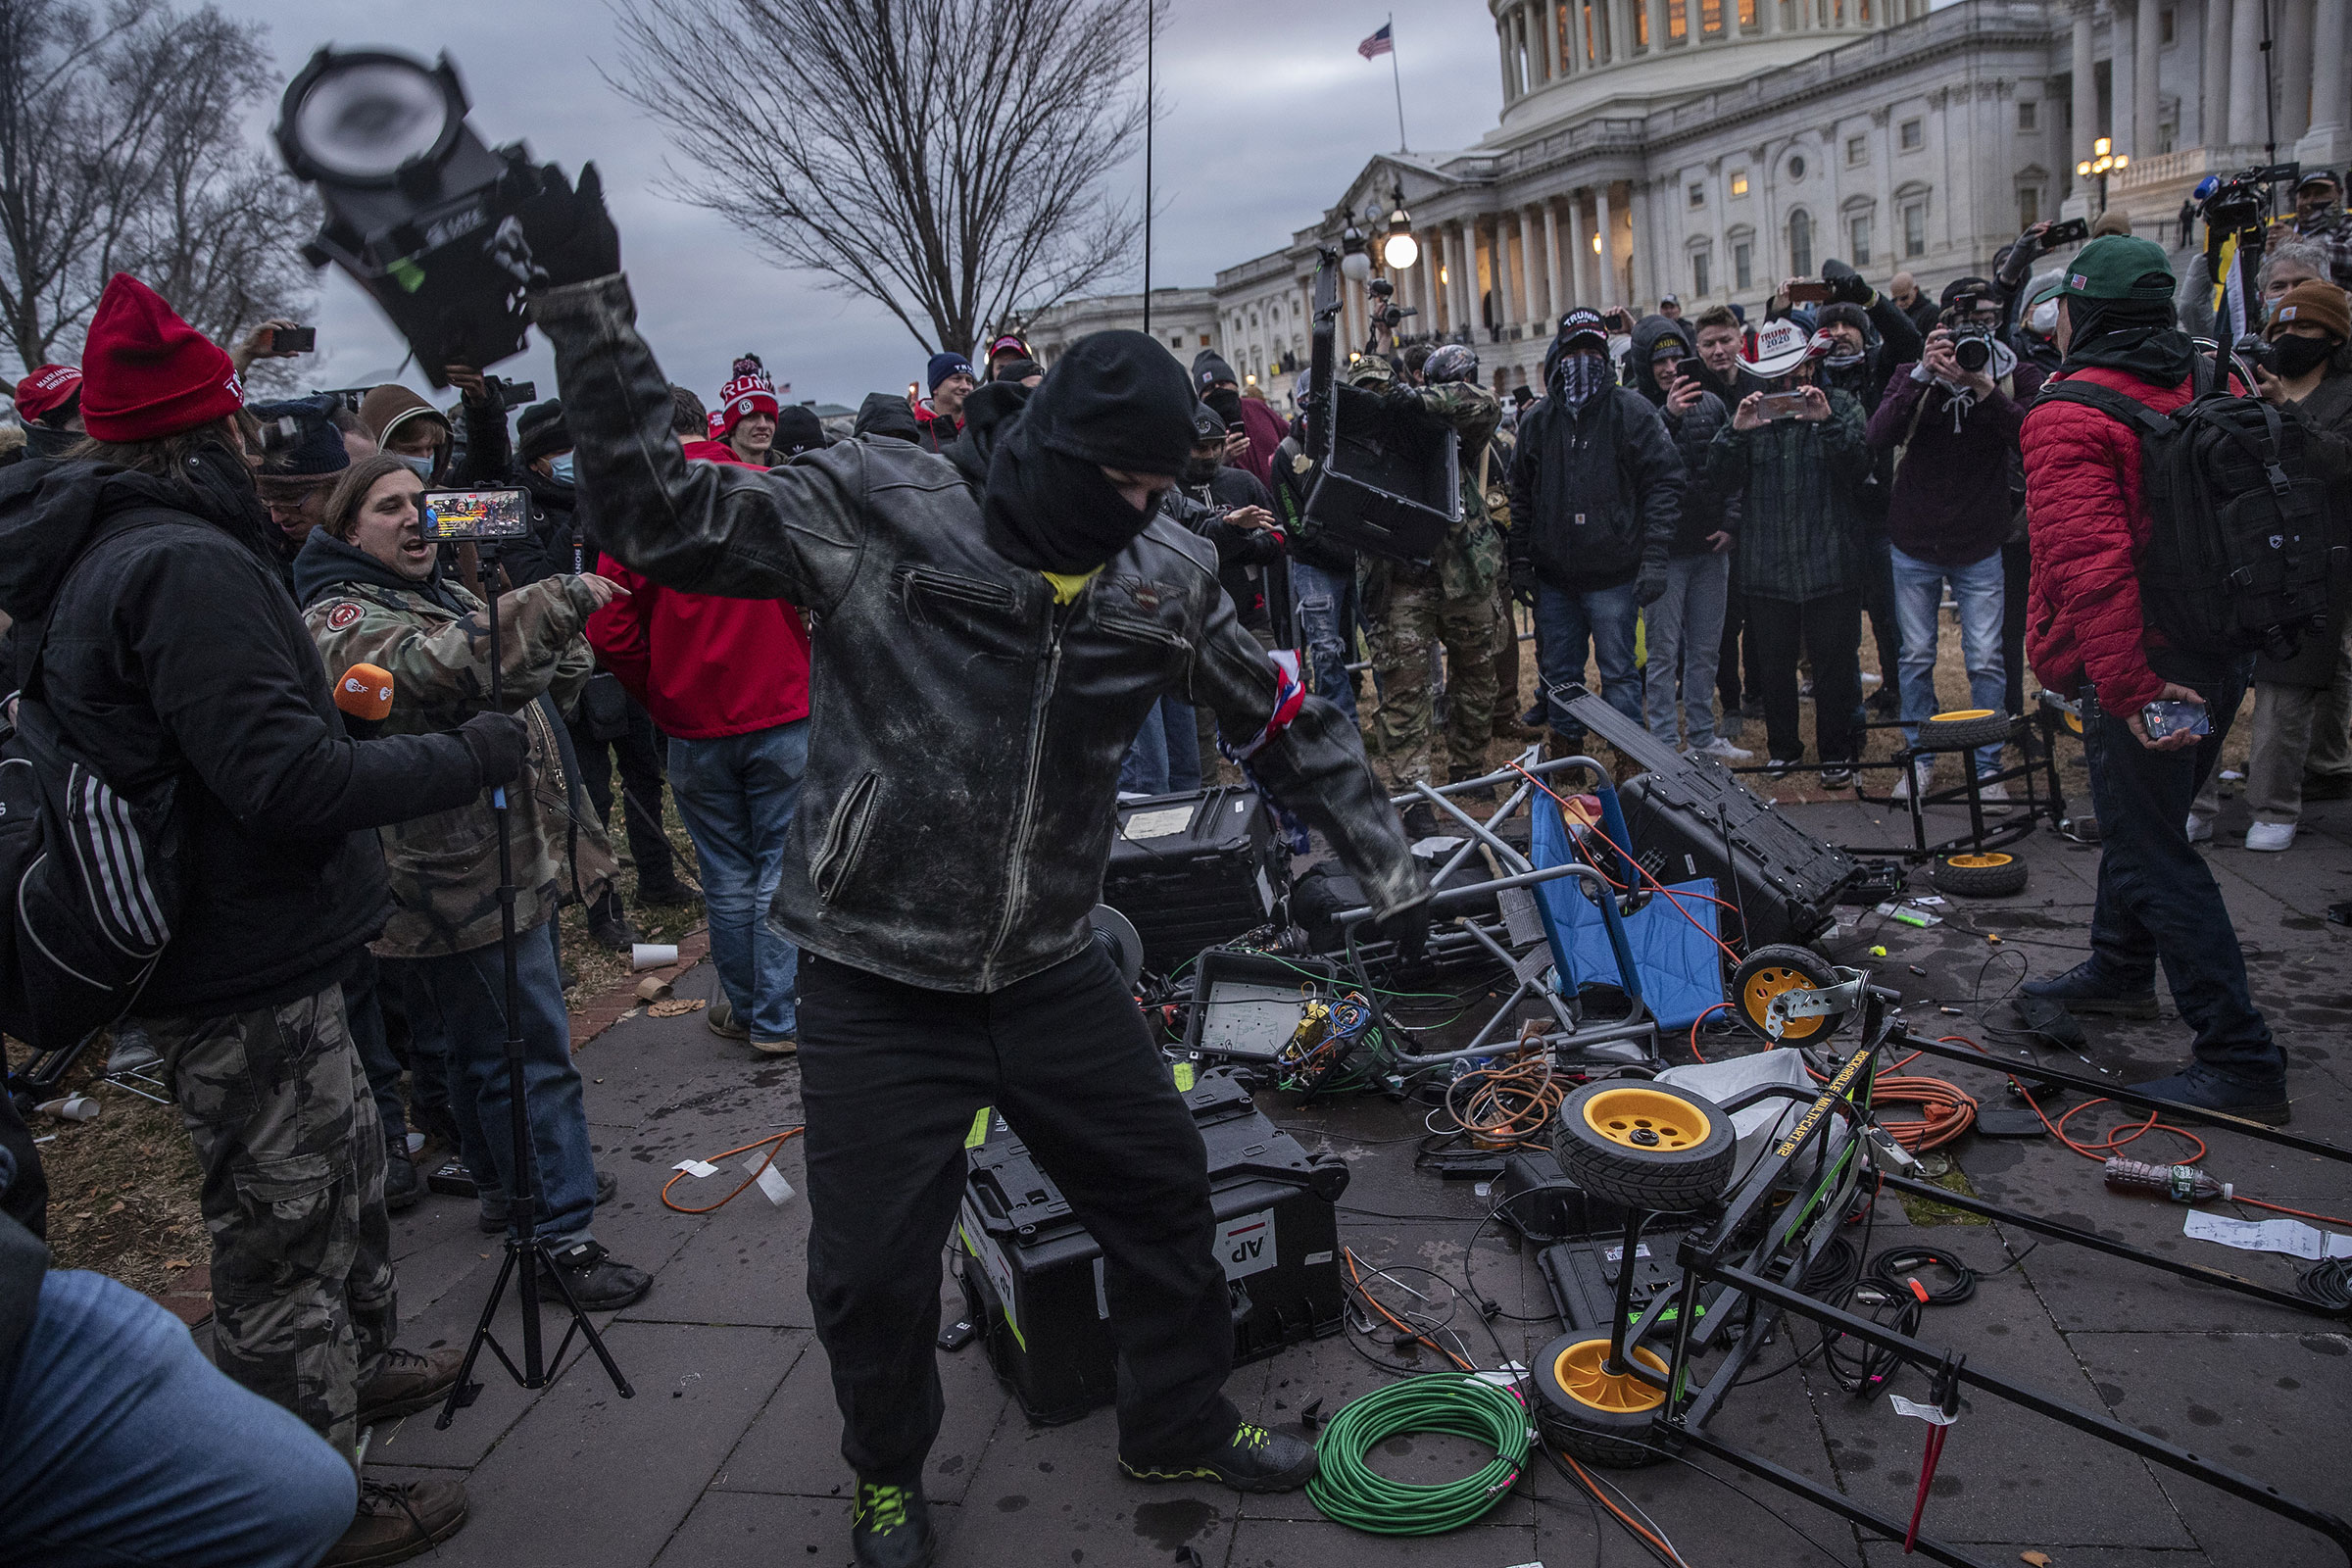 Demonstrators destroy broadcast video equipment outside the U.S. Capitol building after they earlier stormed the building in Washington, DC, U.S., on Wednesday, Jan. 6, 2021. (Victor J. Blue—Bloomberg/Getty Images)